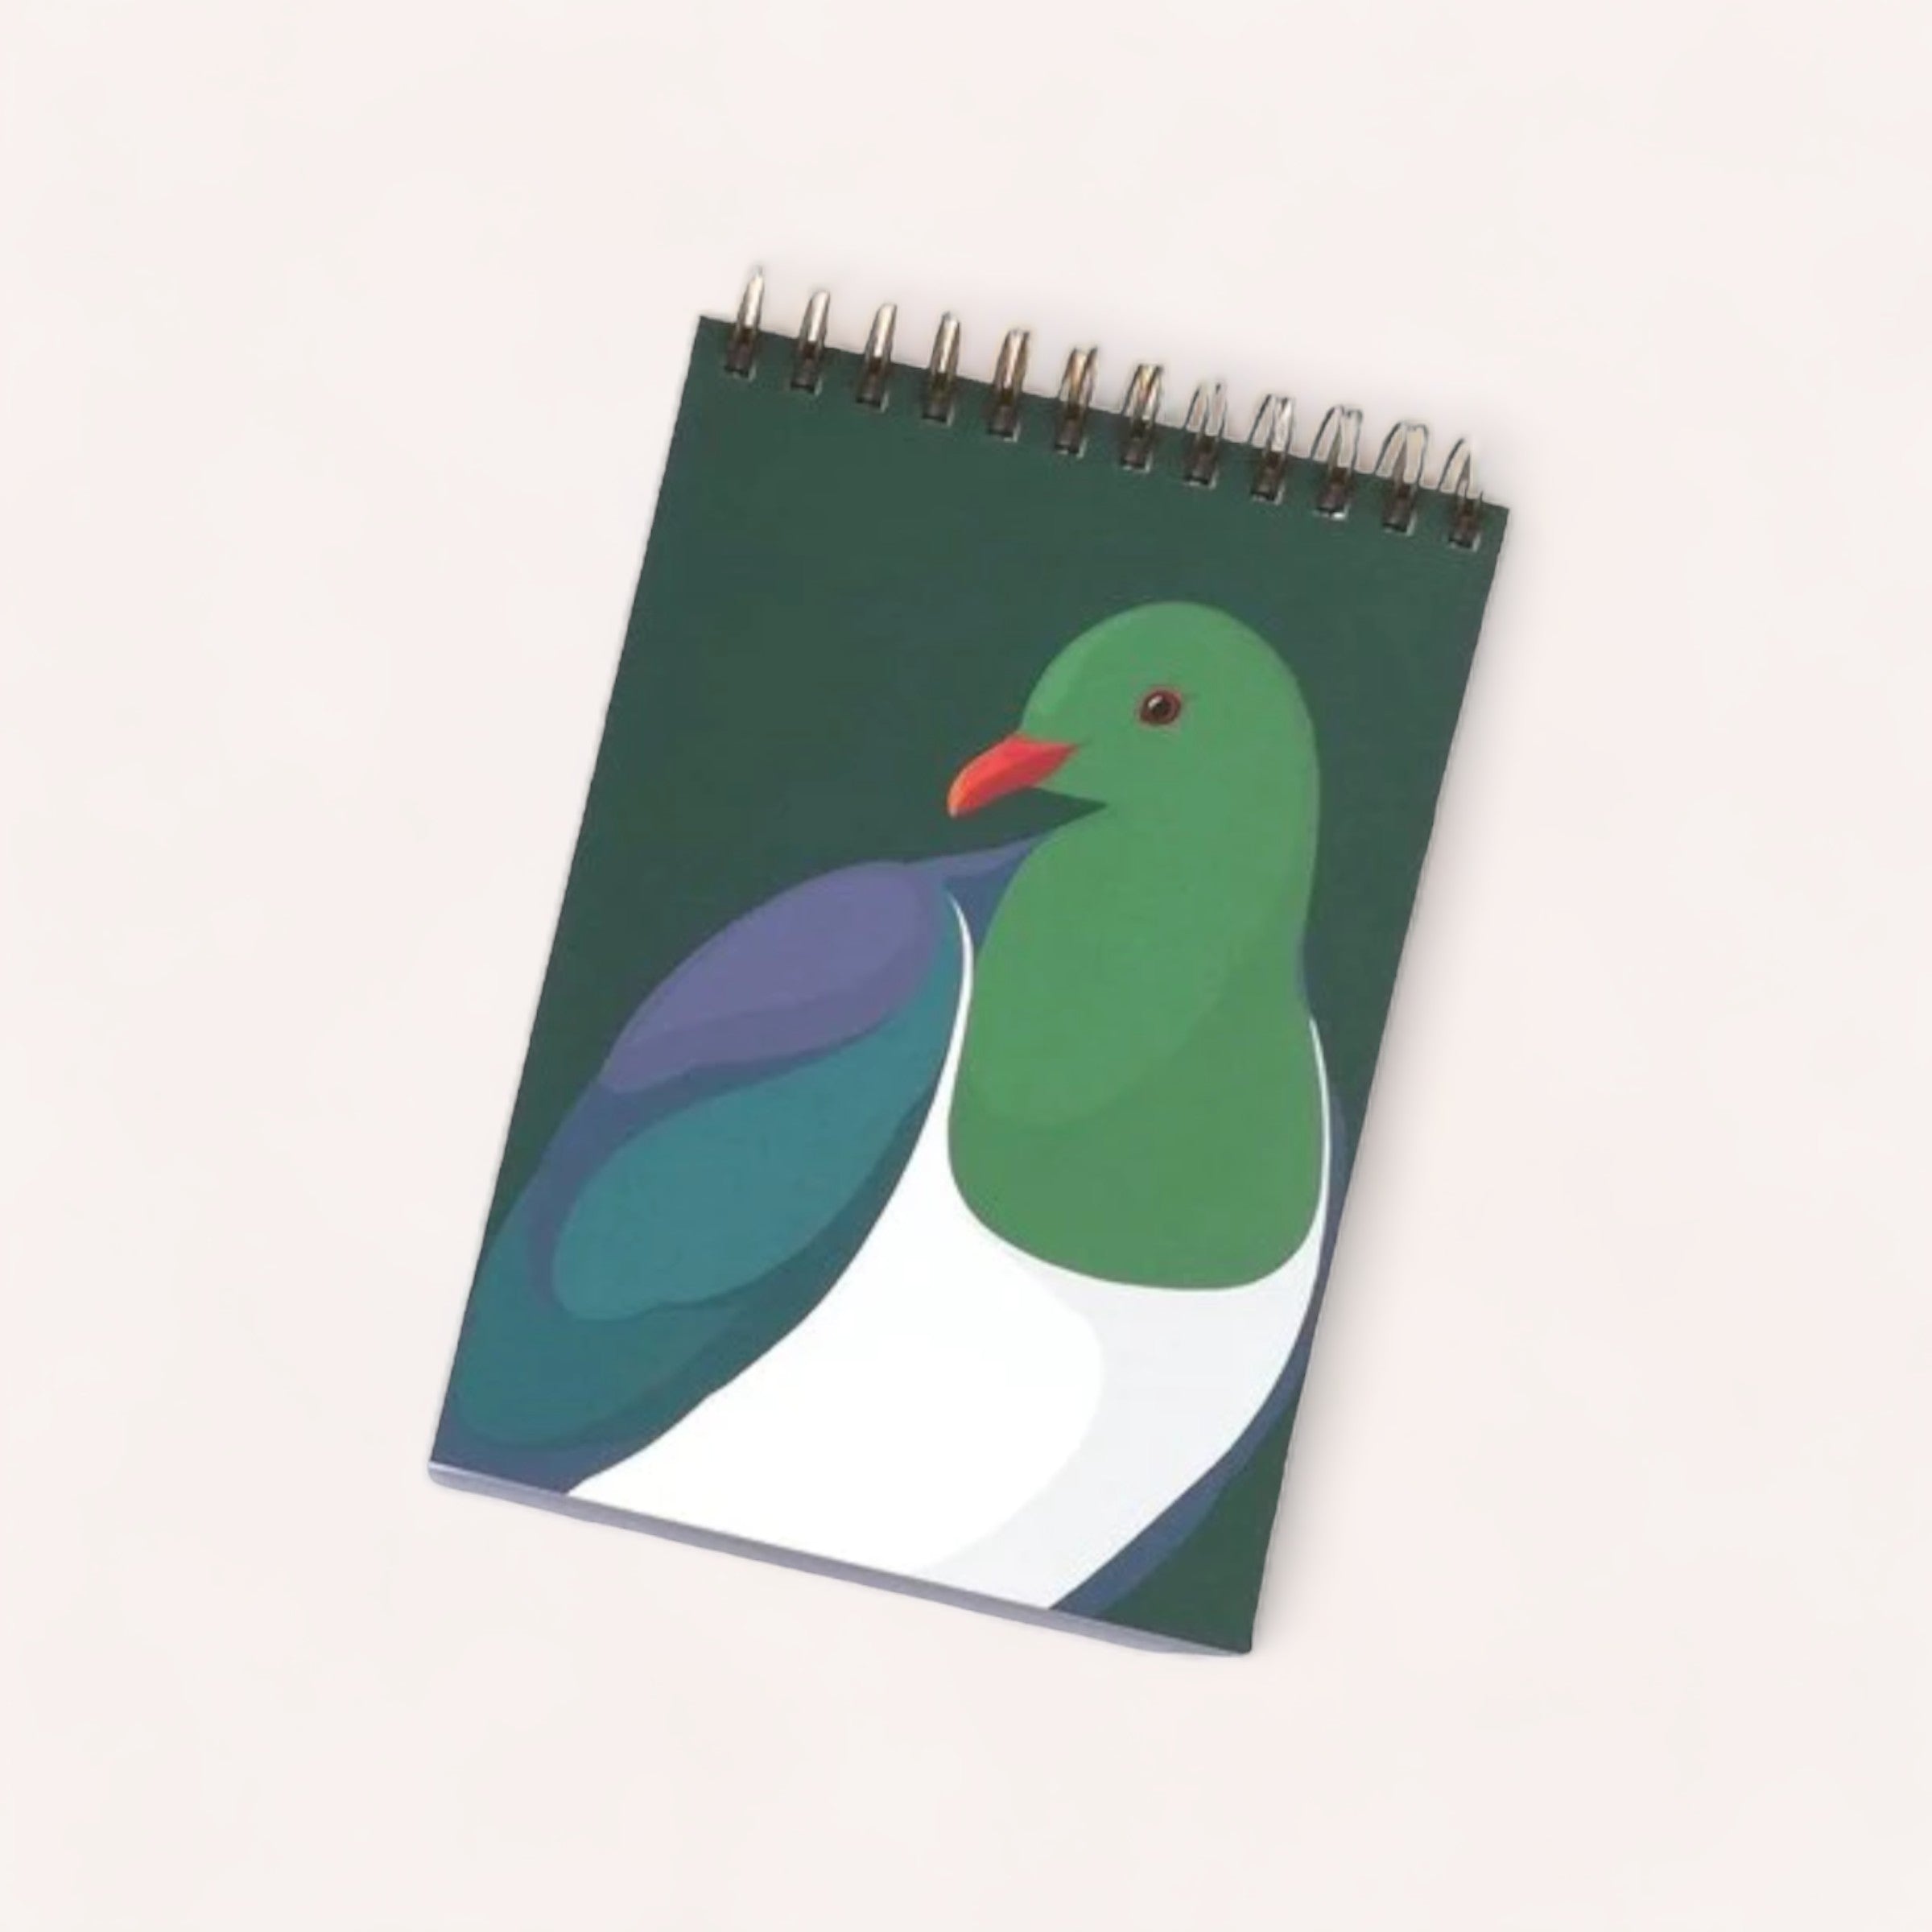 A Kereru Notebook by Hansby Design, featuring a spiral, unlined notebook with an illustrated cover showcasing a stylized green pigeon against a dark background.